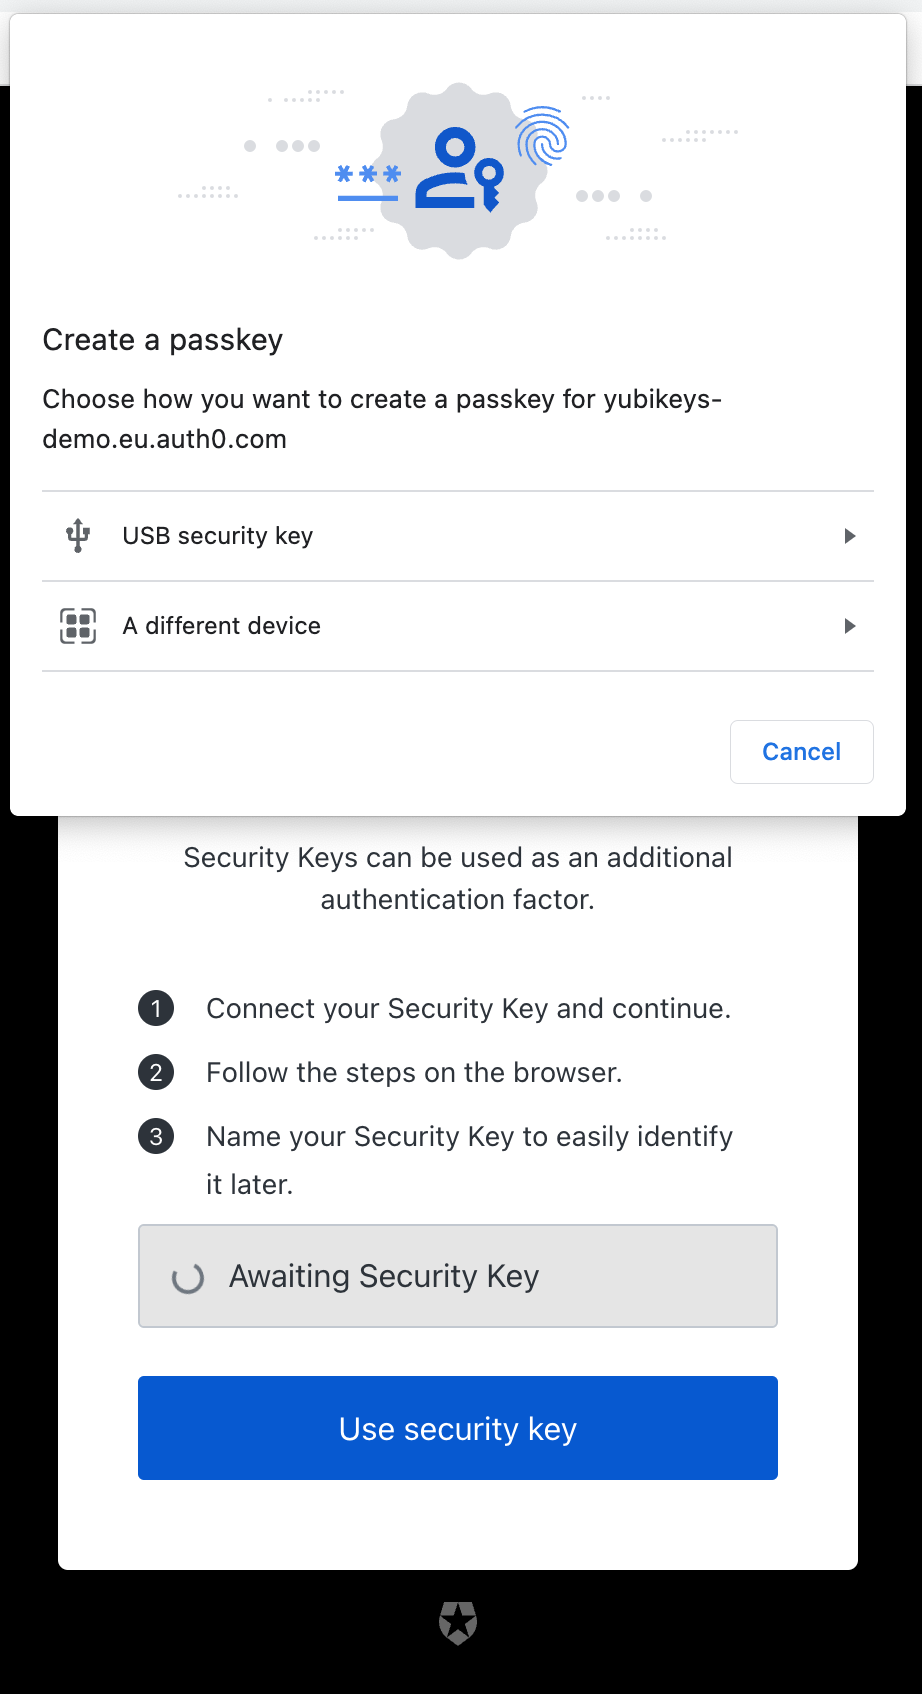 Select your Security Key